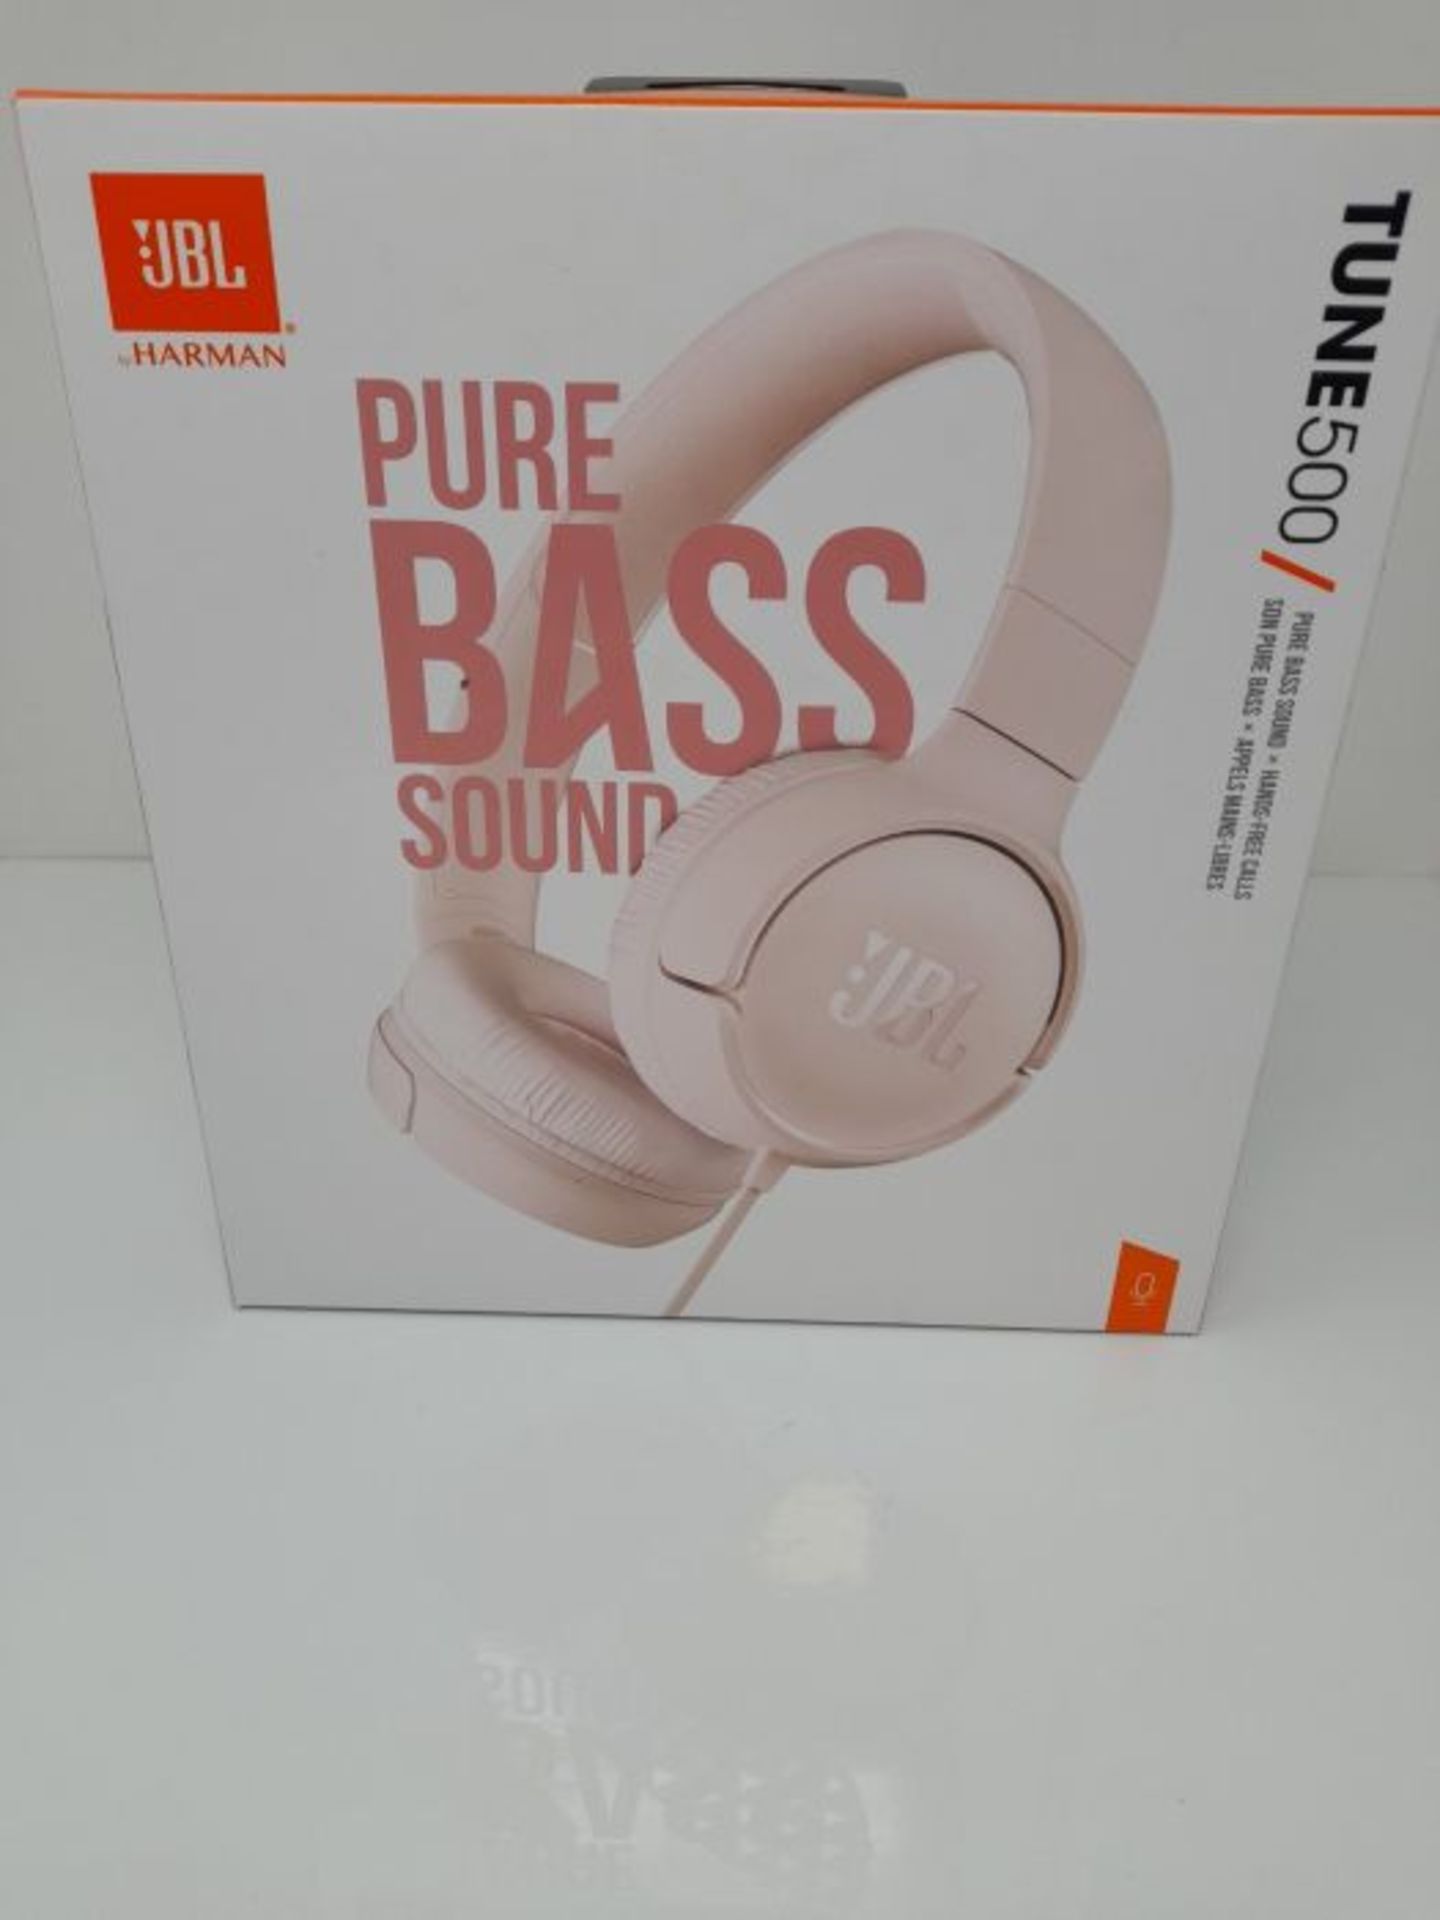 JBL T500 in Pink - Over Ear Lightweight / Foldable Headphones with Pure Bass Sound - 1 - Image 2 of 3